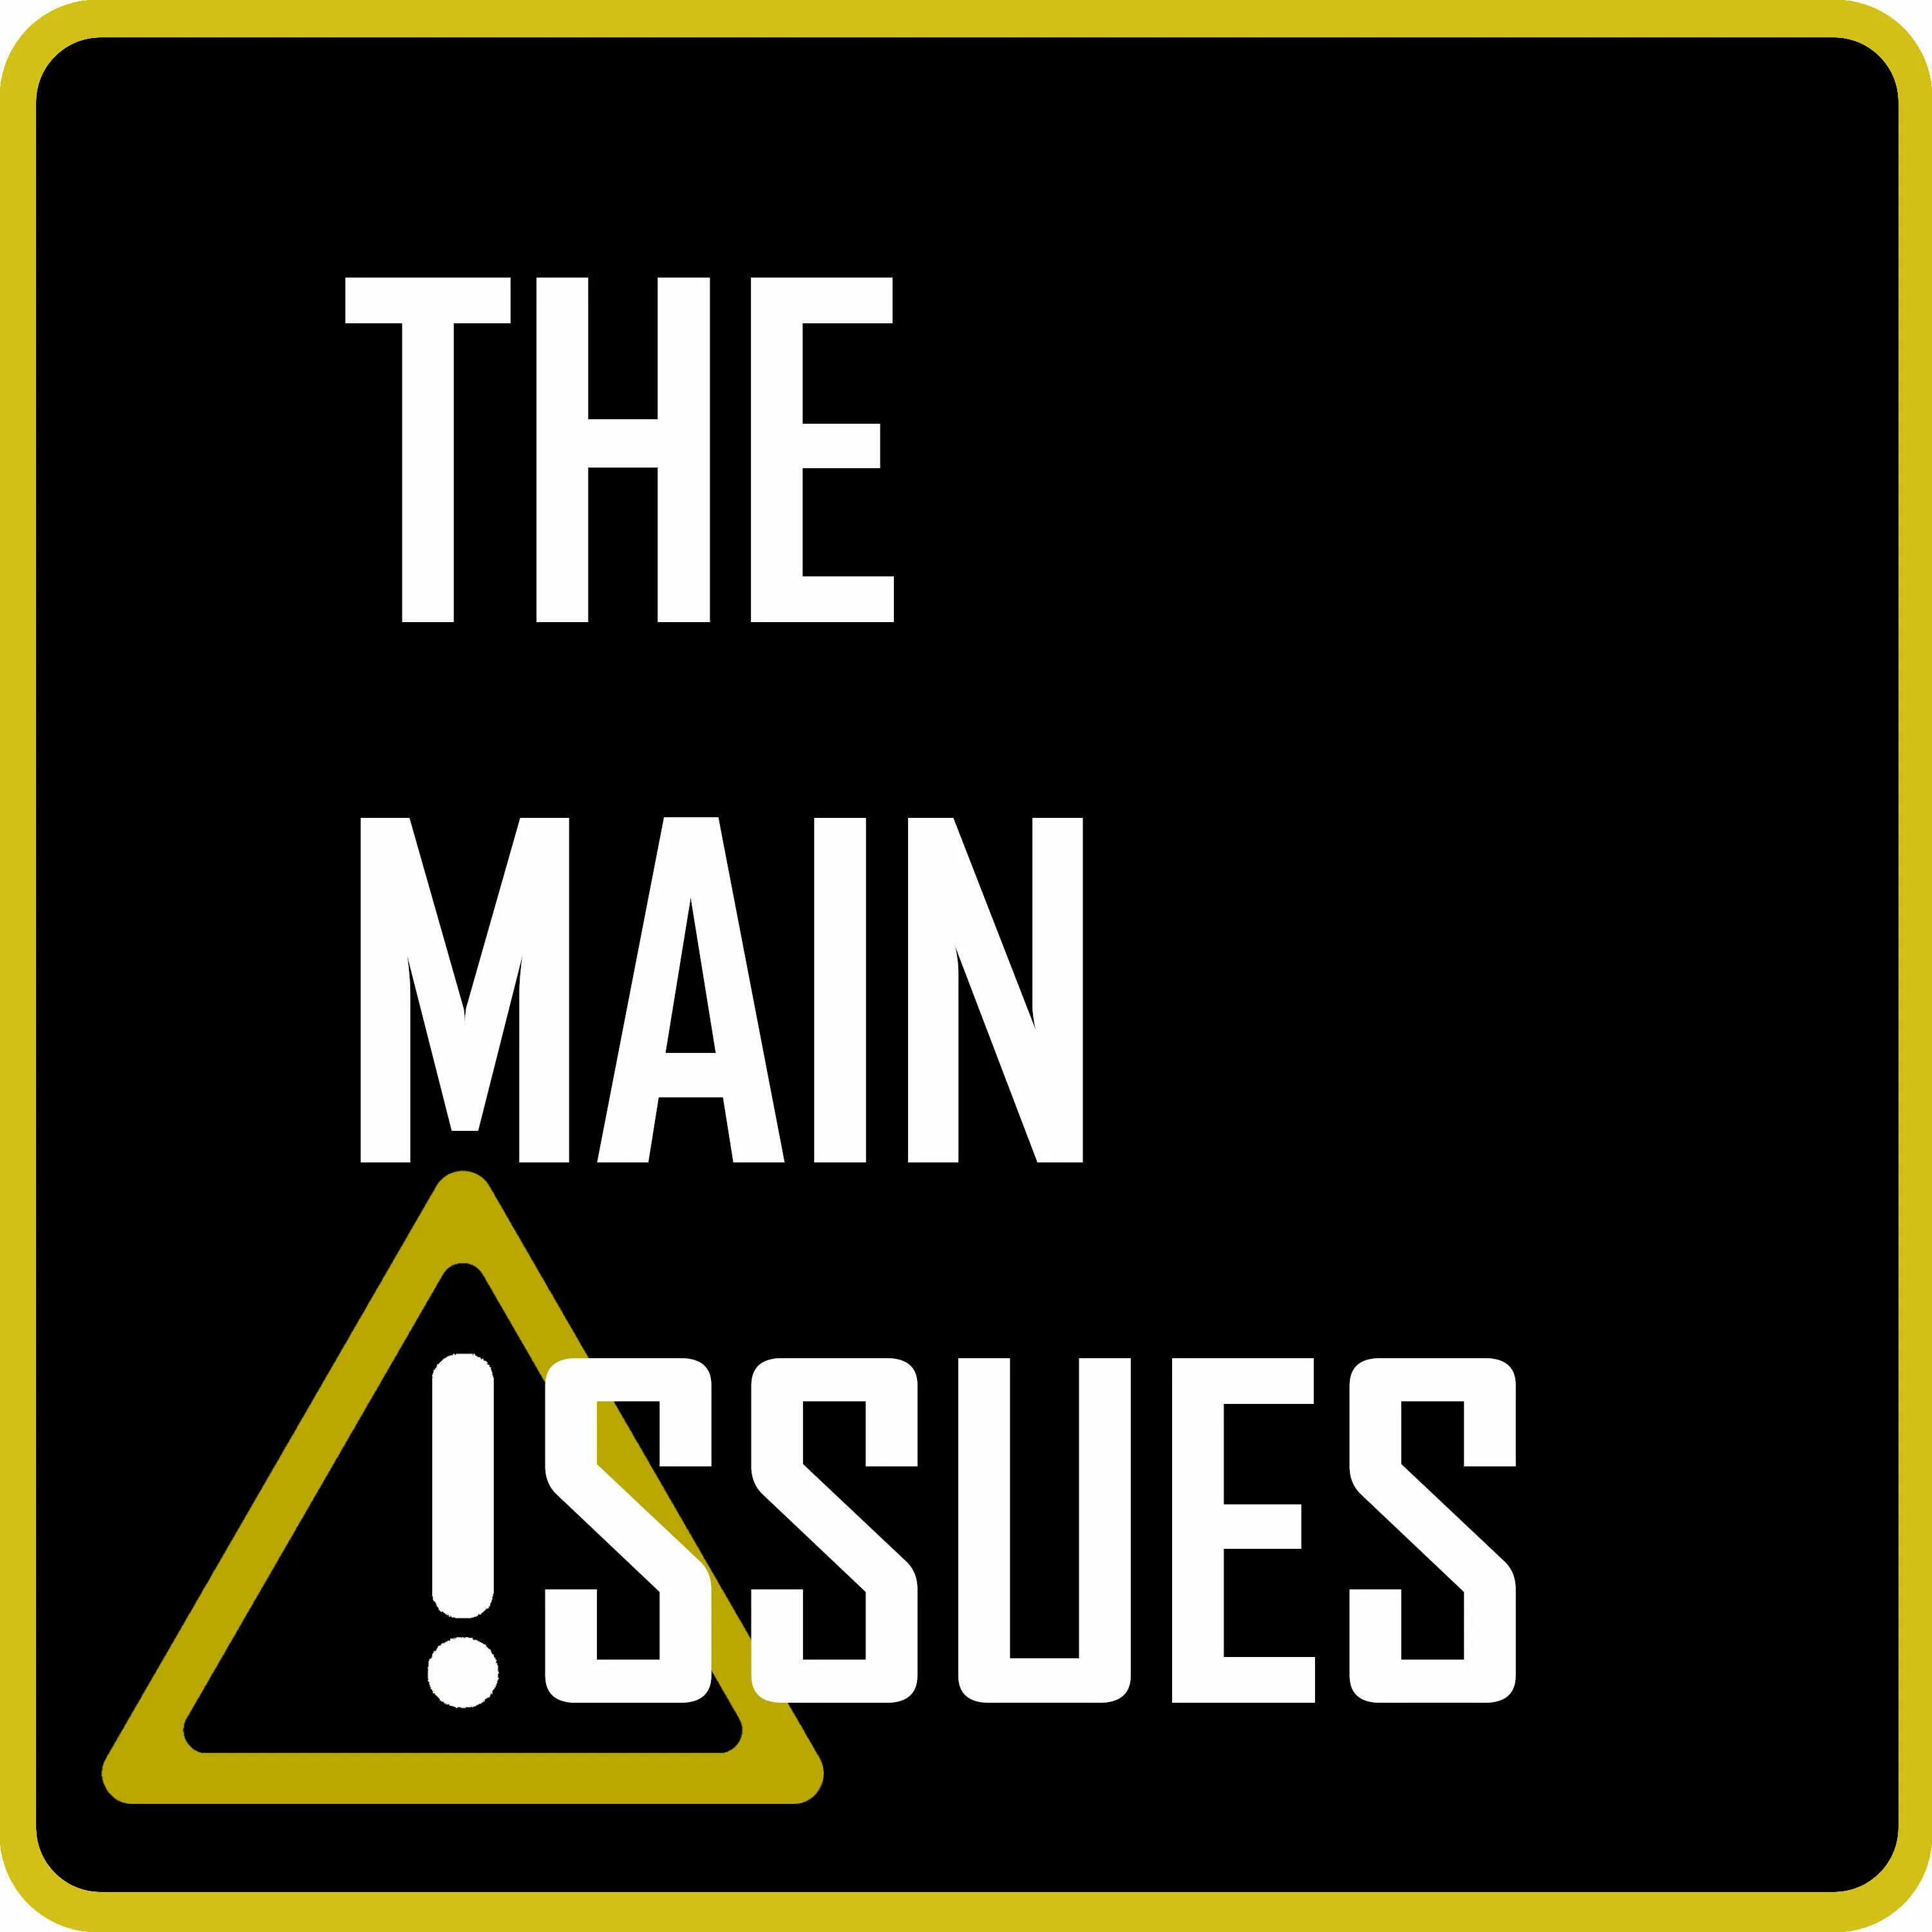 Main issues